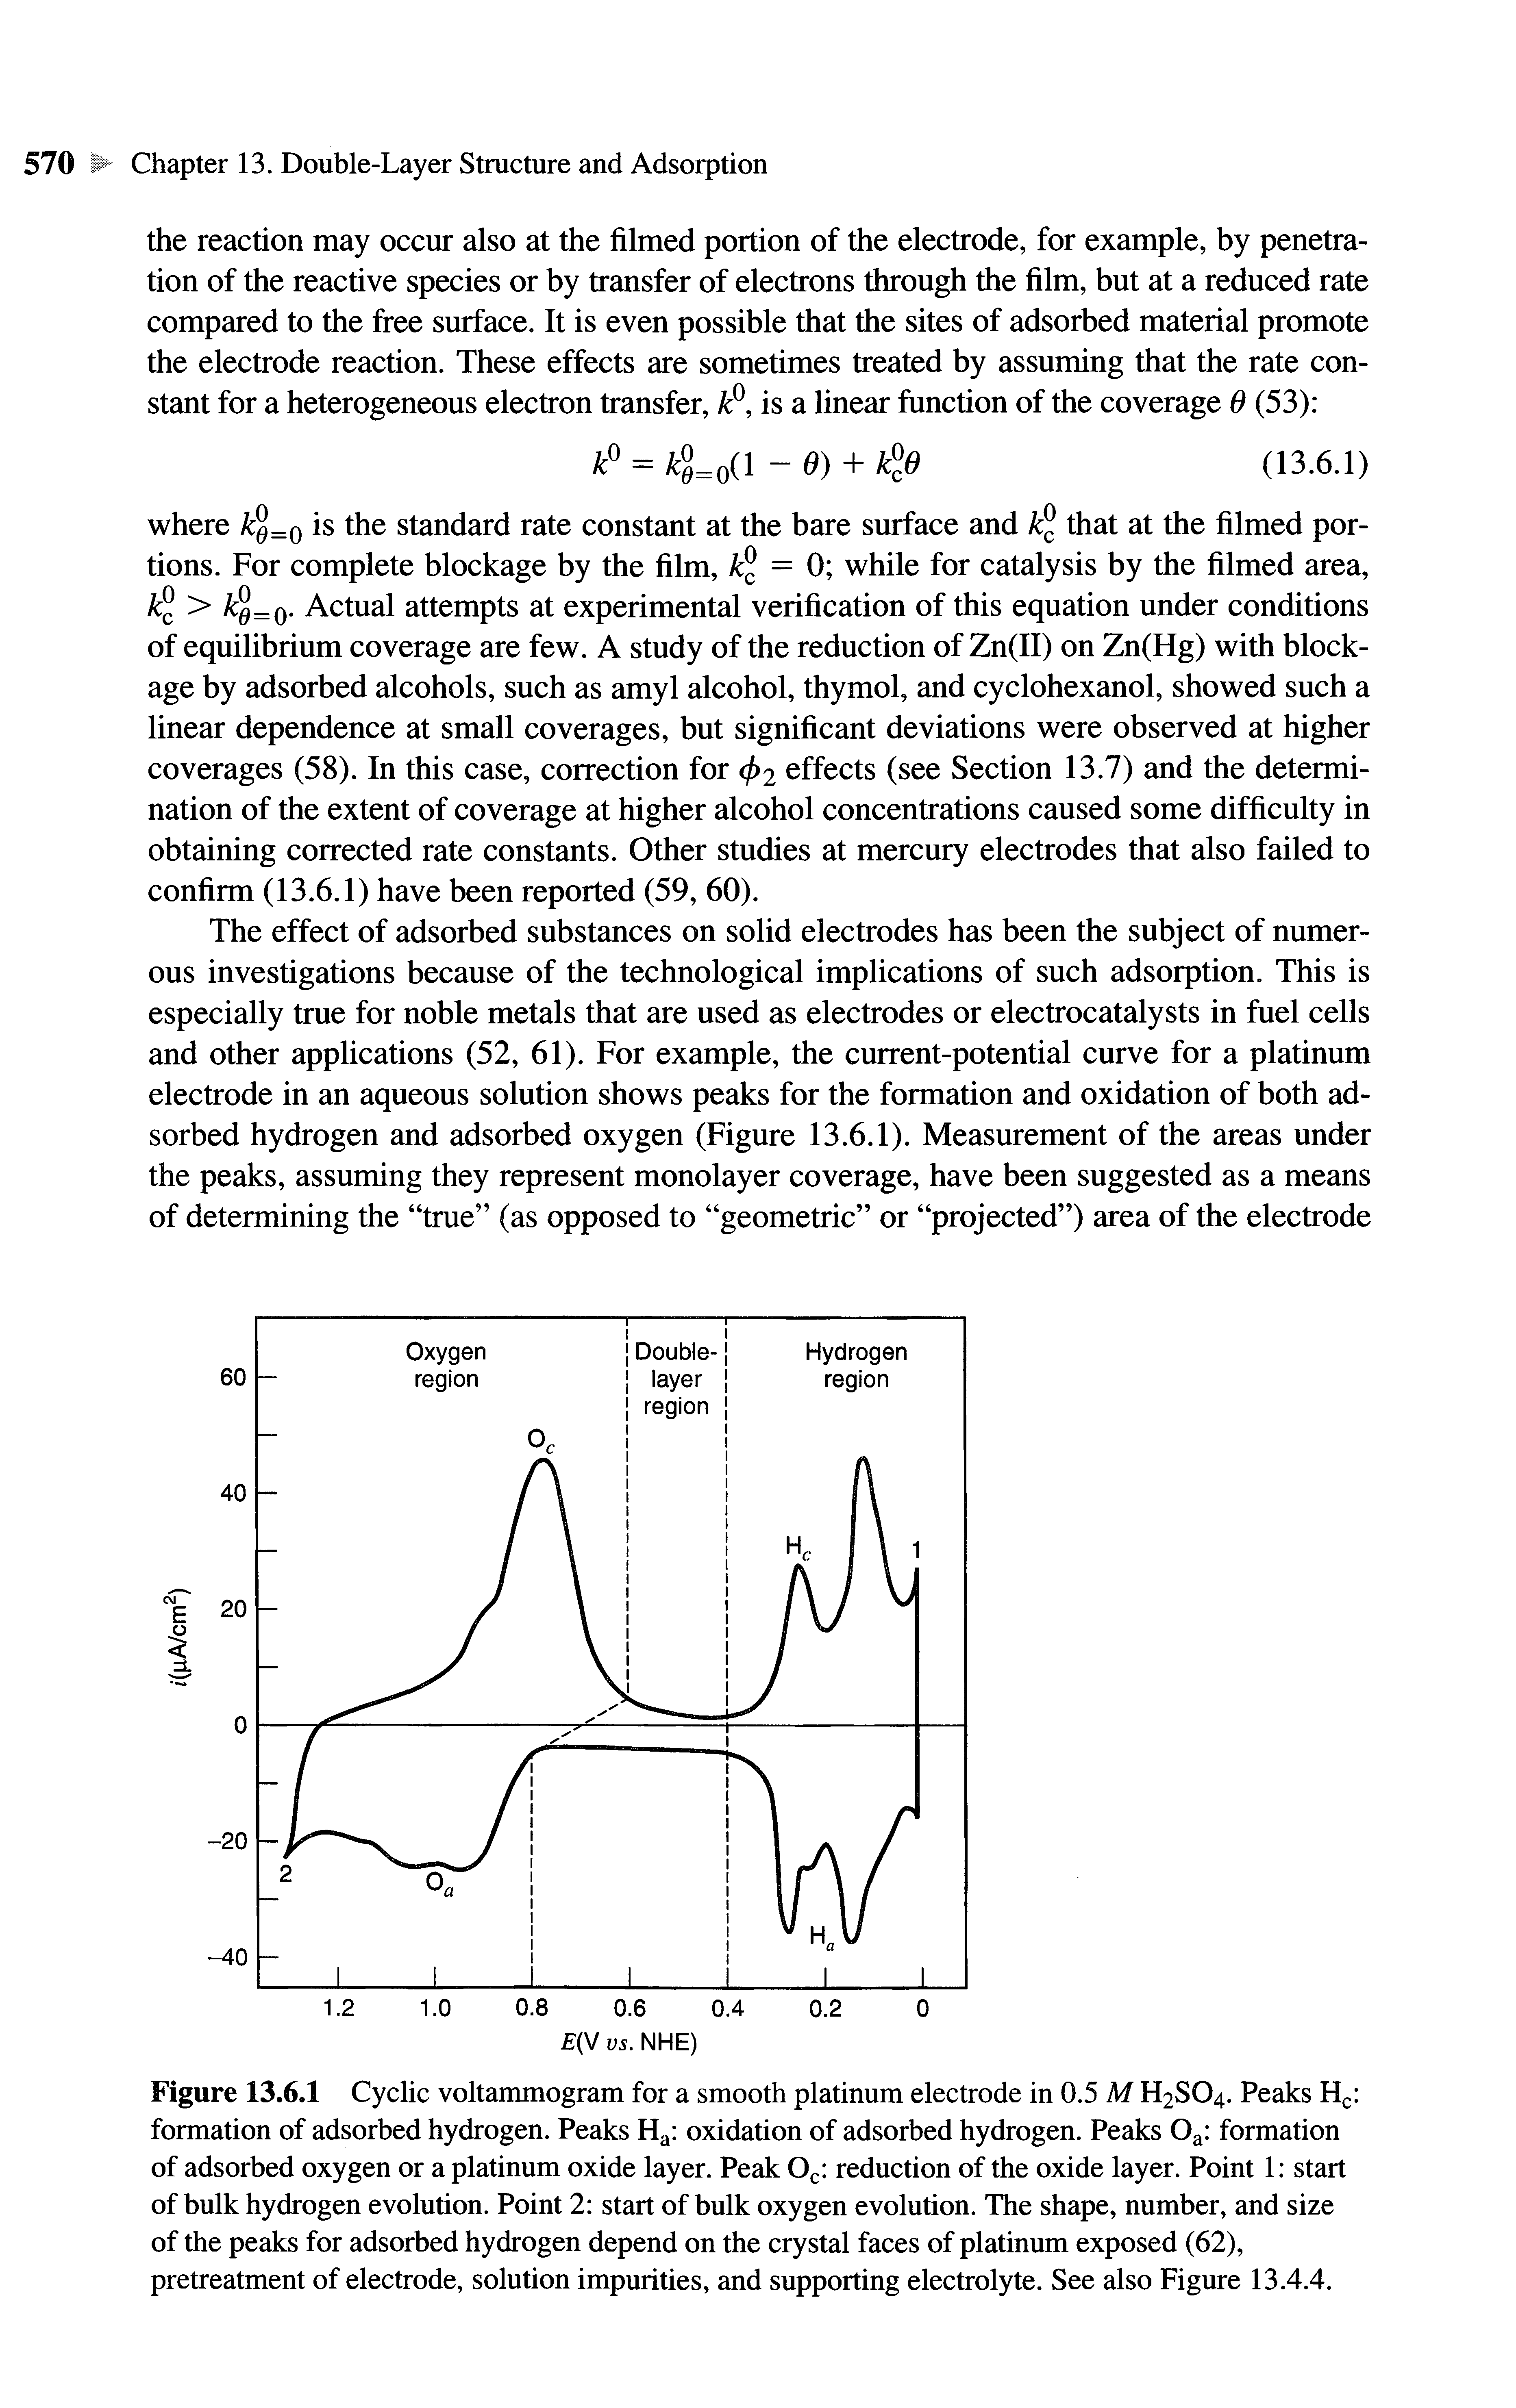 Figure 13.6.1 Cyclic voltammogram for a smooth platinum electrode in 0.5 M H2SO4. Peaks formation of adsorbed hydrogen. Peaks H oxidation of adsorbed hydrogen. Peaks Oq formation of adsorbed oxygen or a platinum oxide layer. Peak Oc reduction of the oxide layer. Point 1 start of bulk hydrogen evolution. Point 2 start of bulk oxygen evolution. The shape, number, and size of the peaks for adsorbed hydrogen depend on the crystal faces of platinum exposed (62), pretreatment of electrode, solution impurities, and supporting electrolyte. See also Figure 13.4.4.